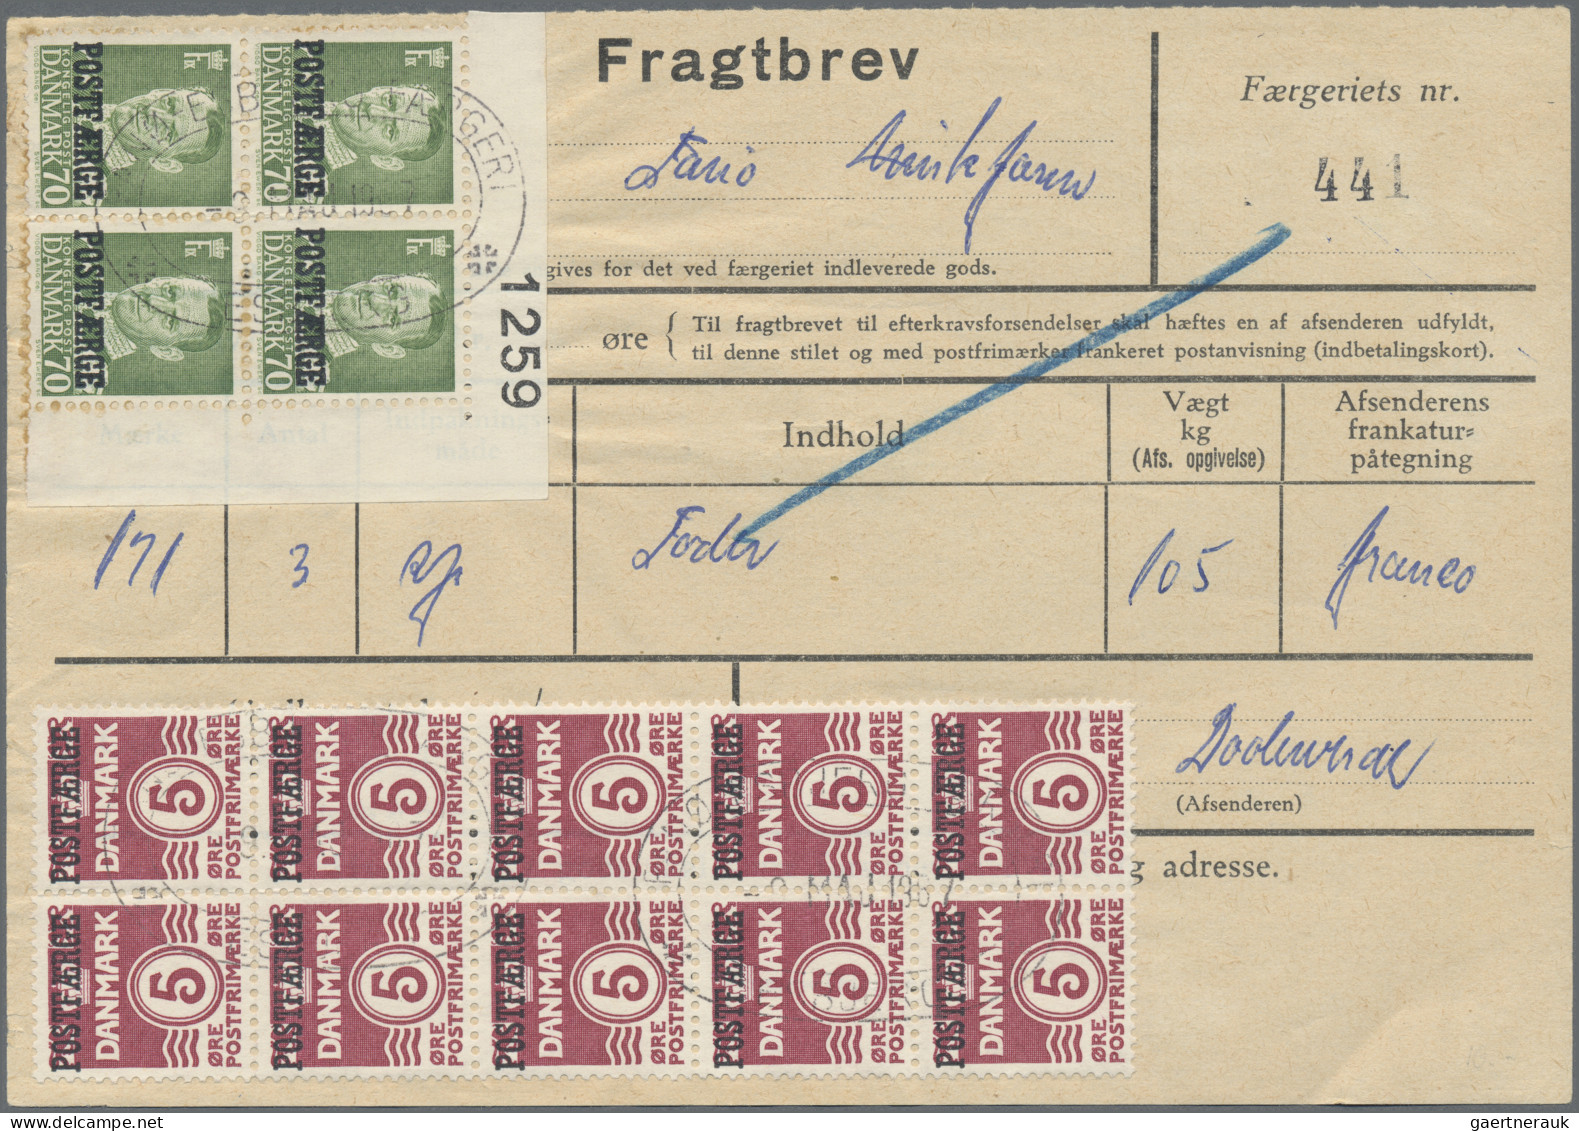 Denmark: 1920/1995, Parcel Depatch Forms/Freight Papers etc., assortment of 50 i